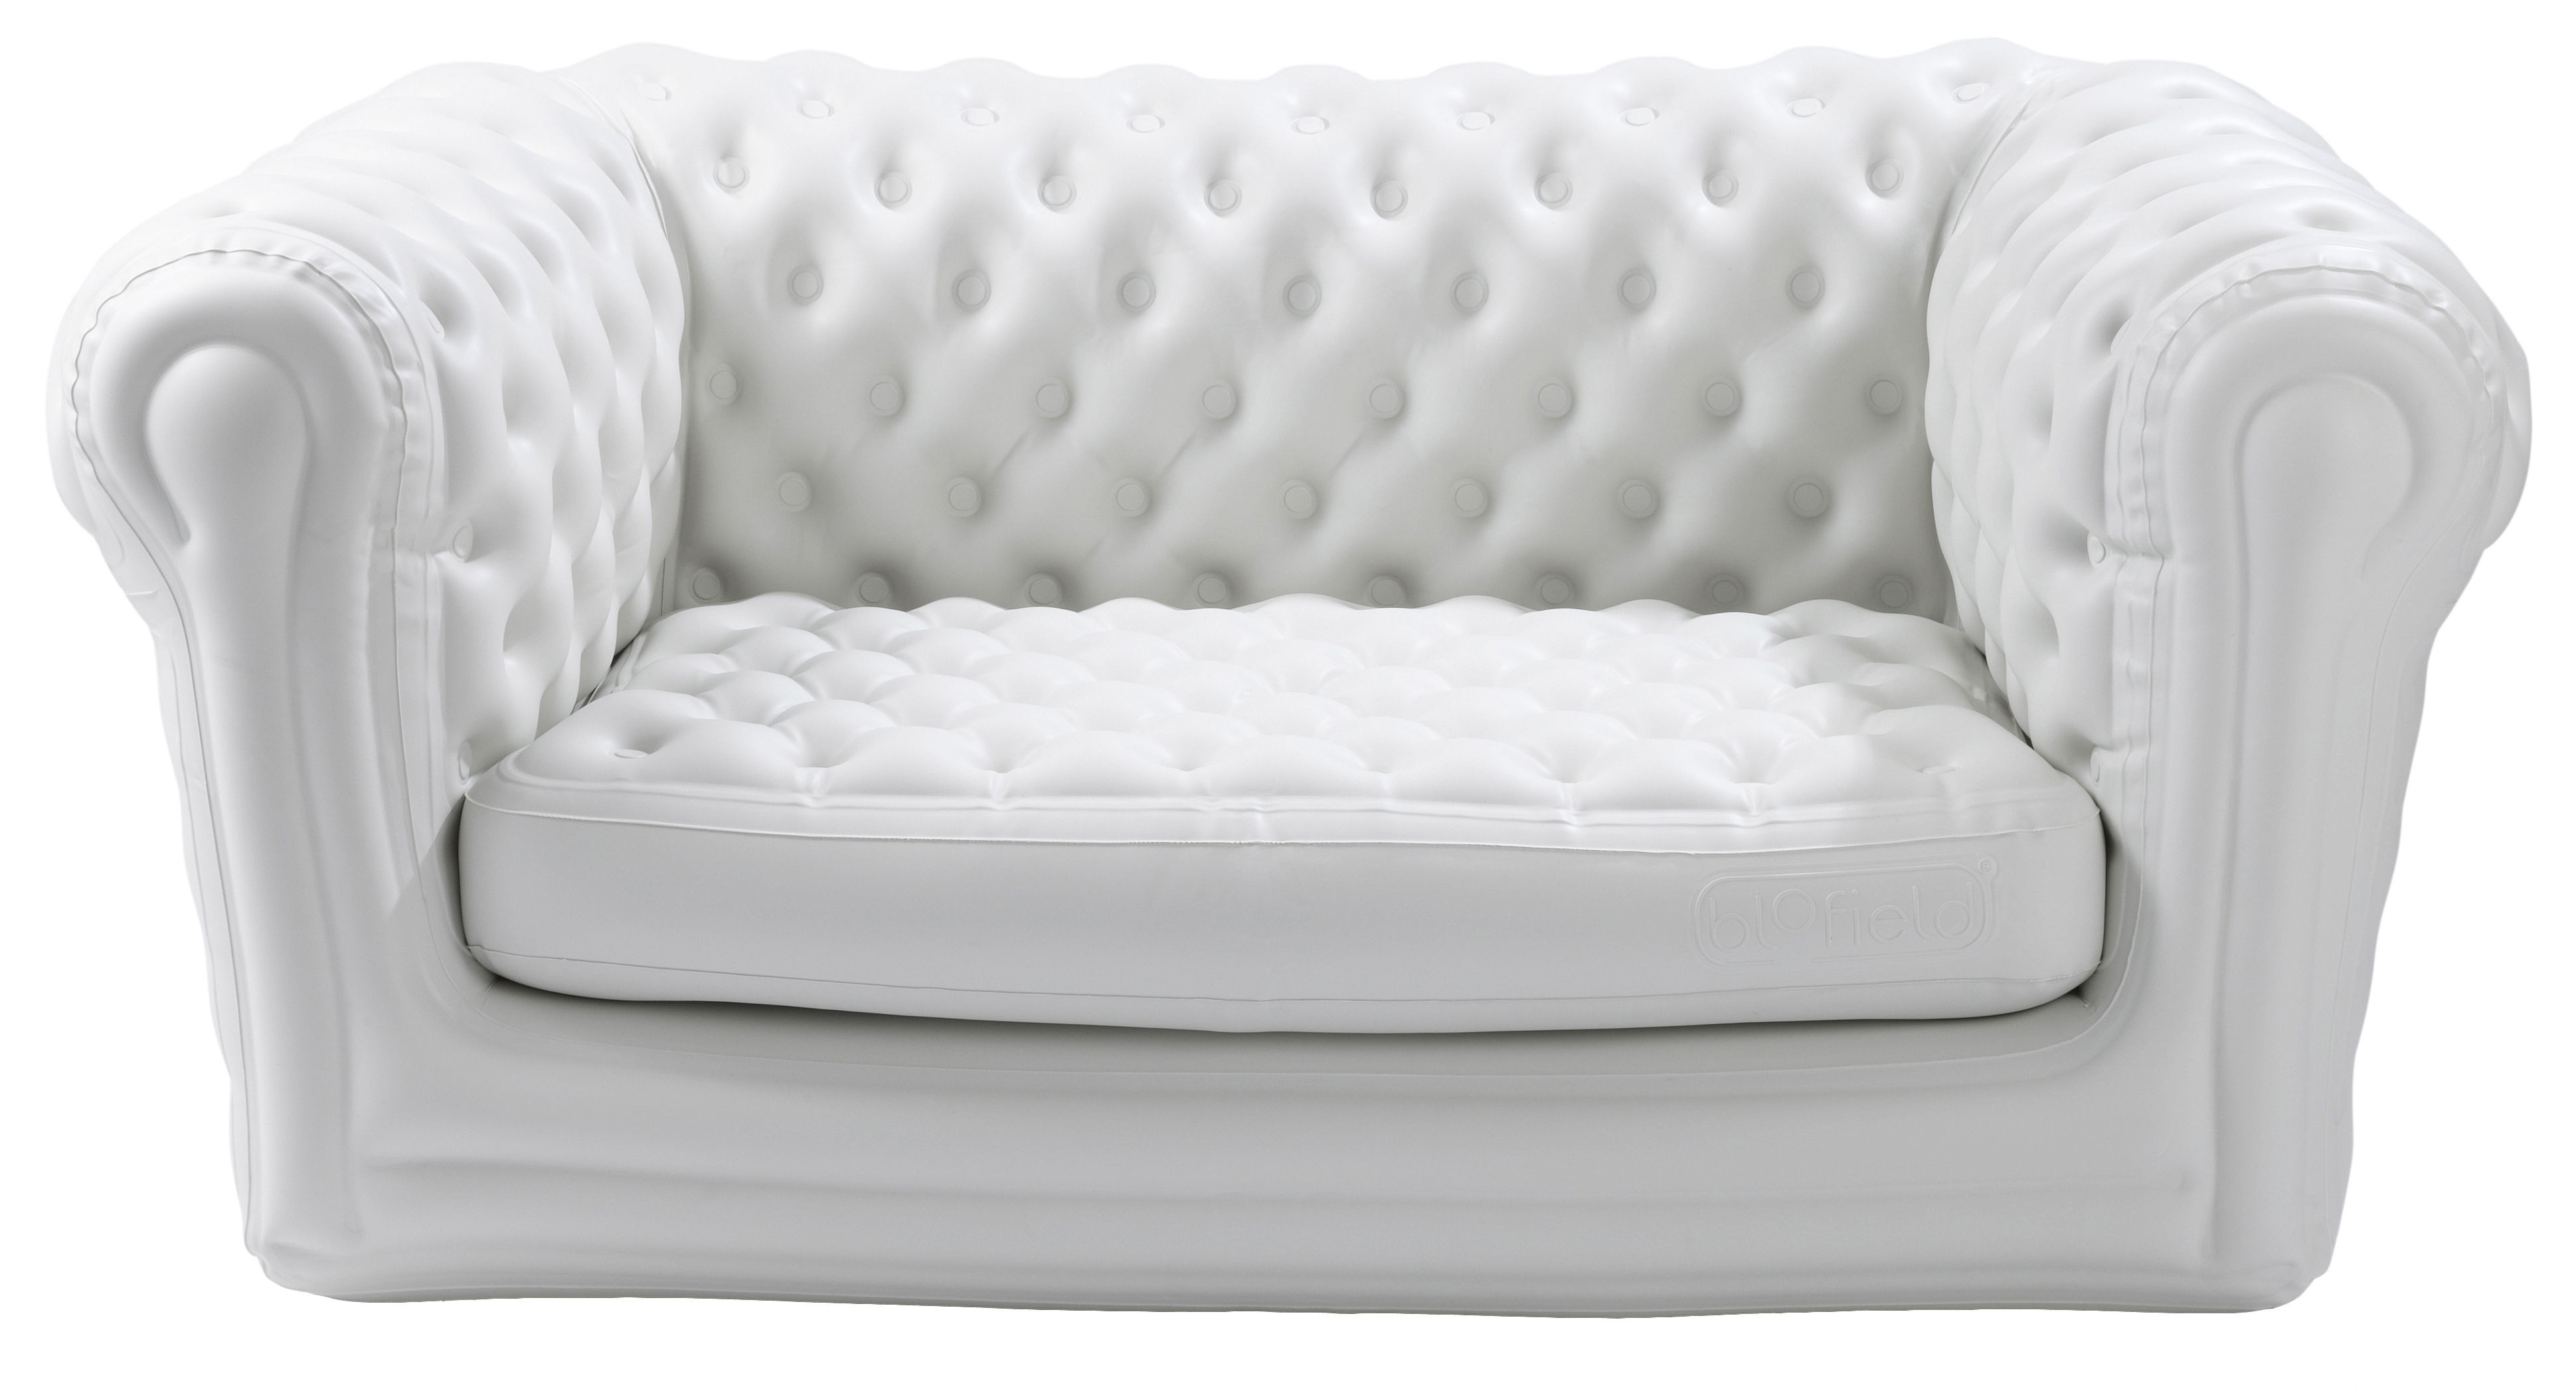 inflatable sofa bed wilkinsons